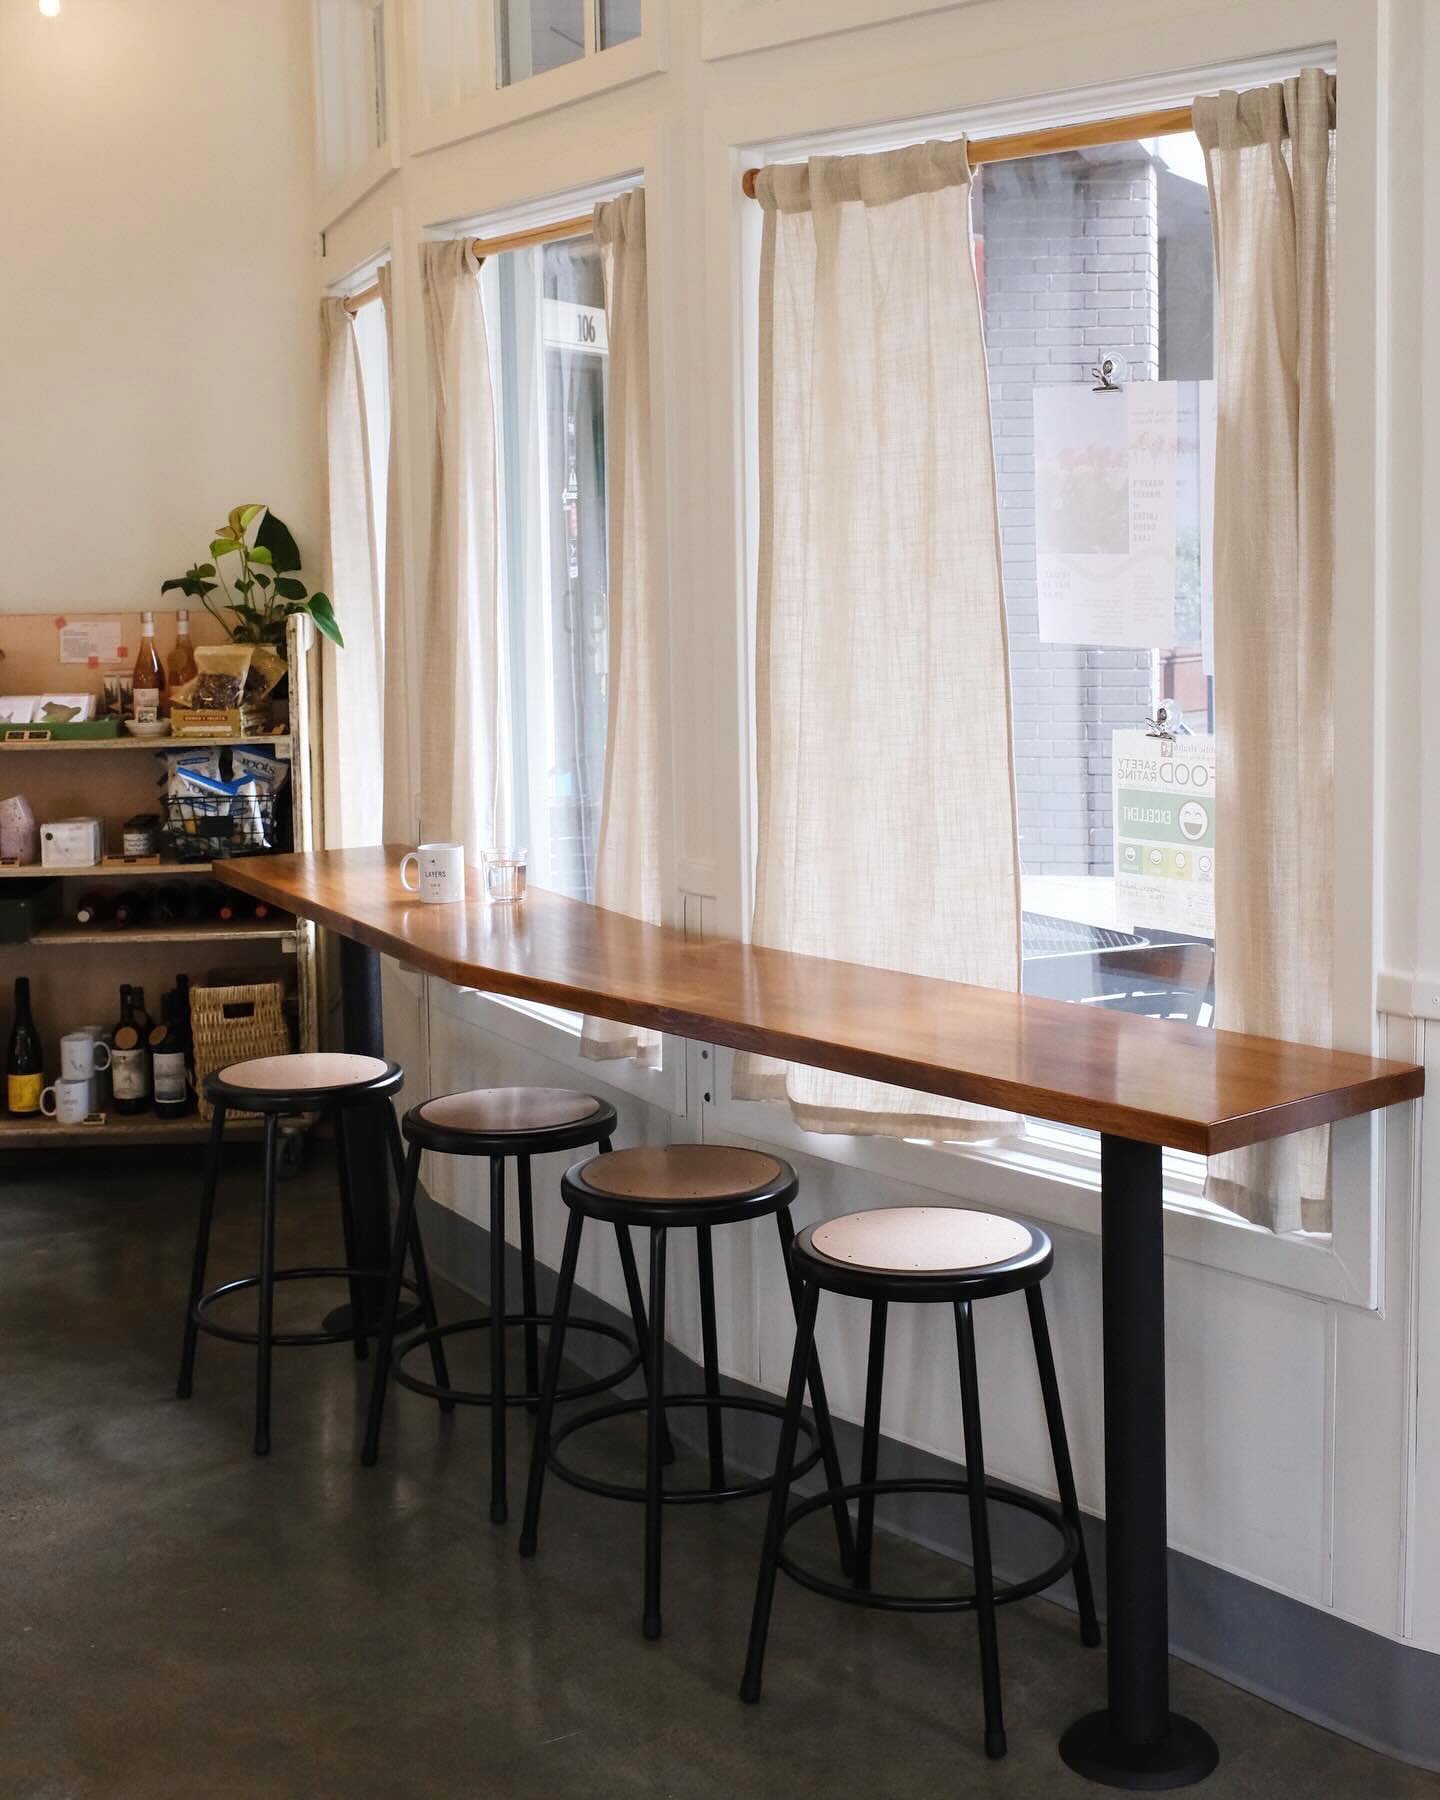 When we walked into what would become Layers Green Lake for the first time, we were struck by its countless windows, and proximity to the park. Both dreamy and convenient it has become a home away from home, a neighborhood spot, THE sandwich shop on 